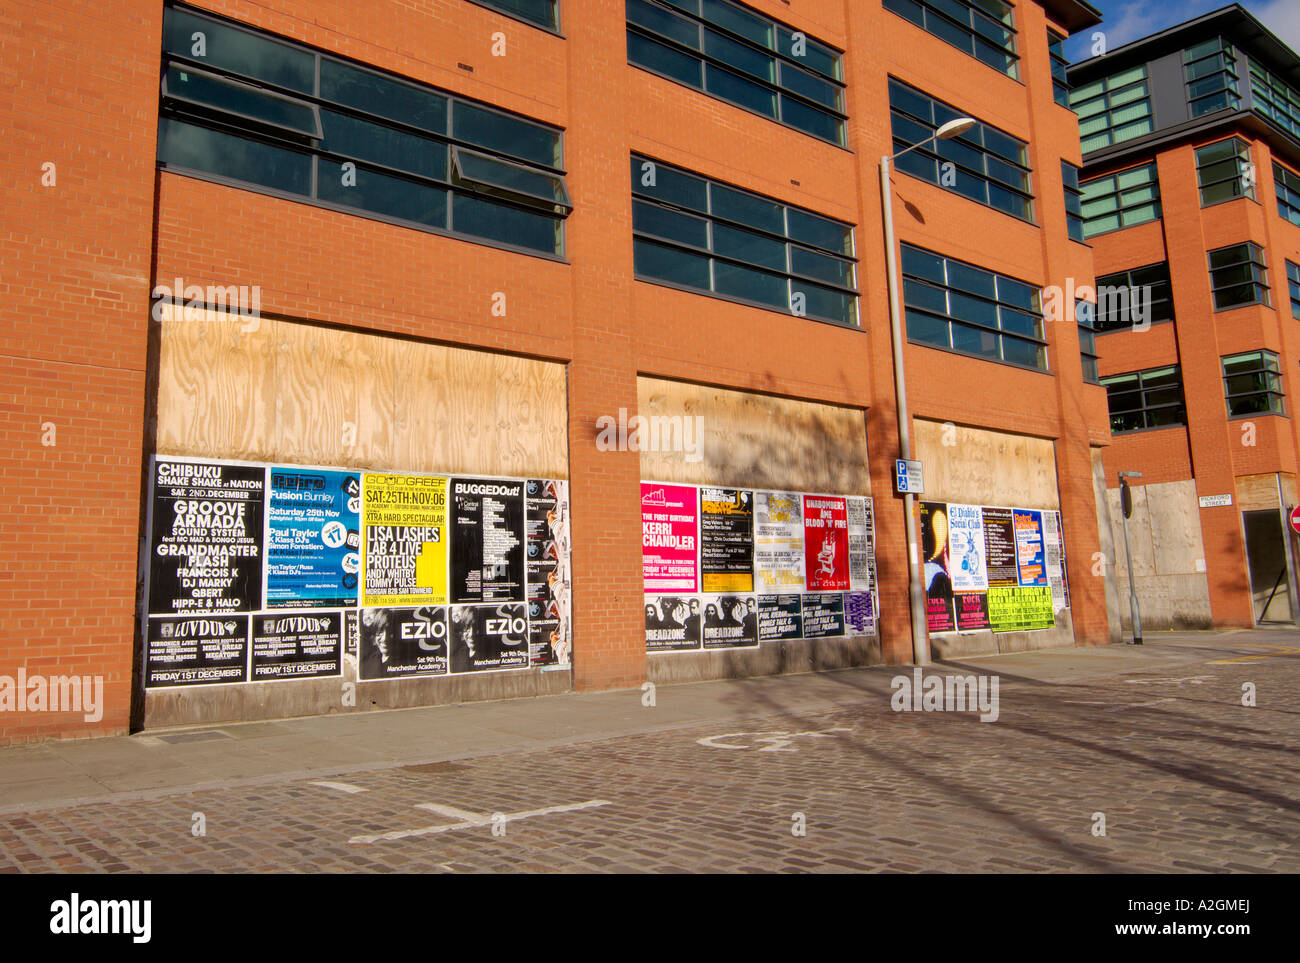 Bill posting or fly posting on modern building in Ancoats East Manchester an area being redeveloped Stock Photo